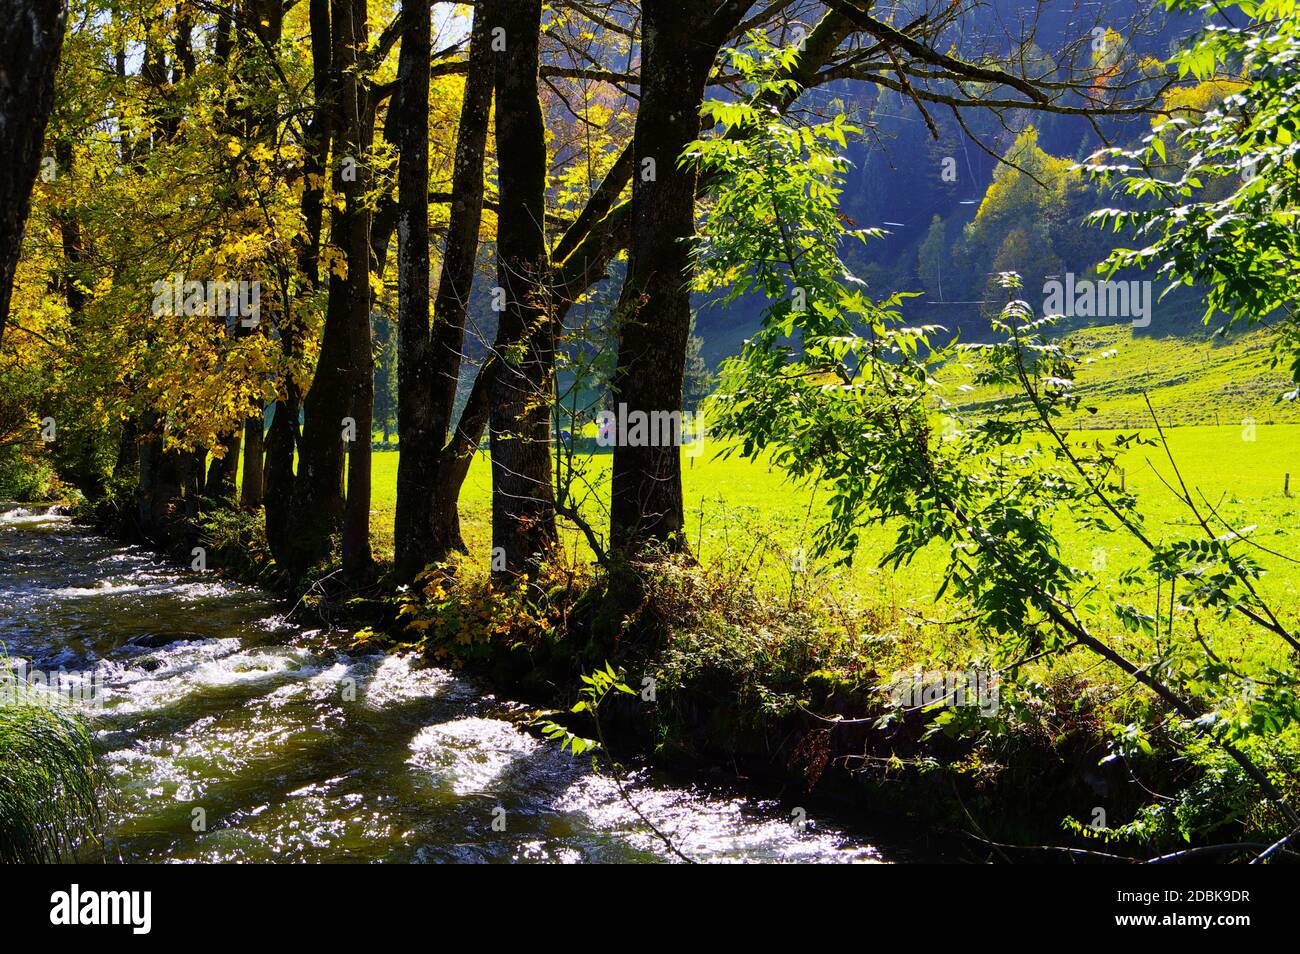 Idyllic mountain stream with trees  in autumn colors  on the bank in beautiful sunlight Stock Photo